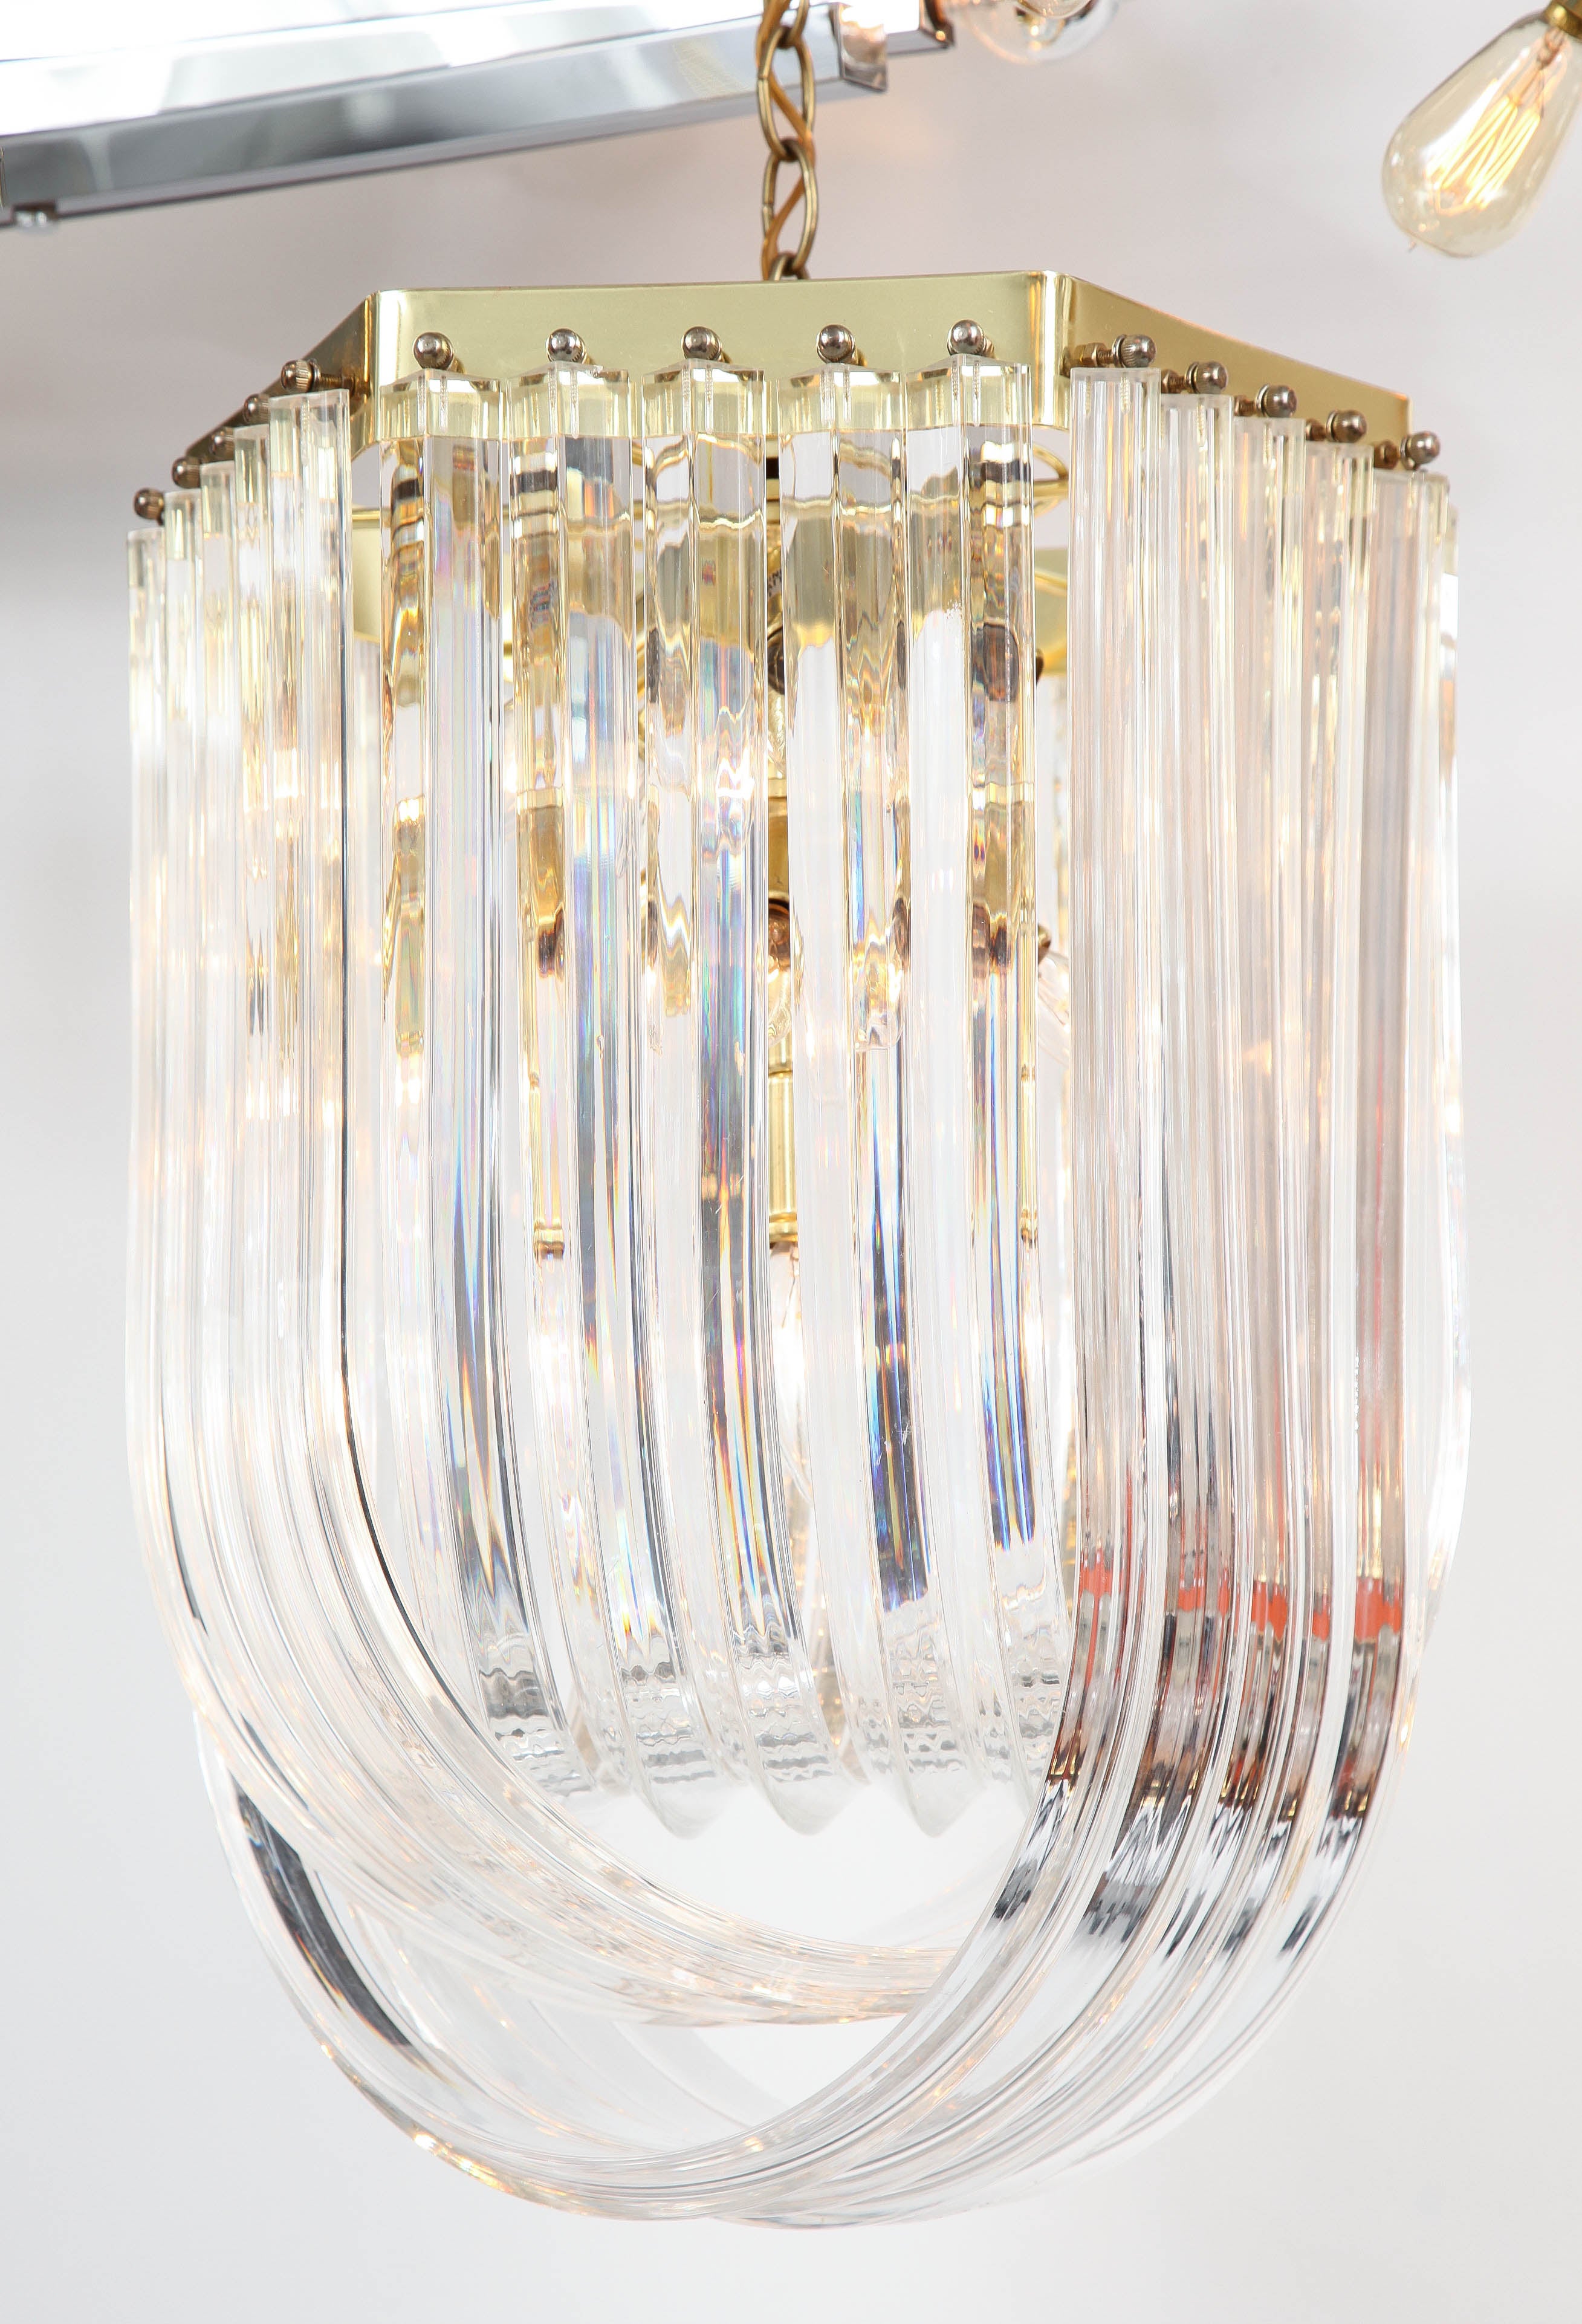 Chandelier, Lucite with Brass Details, C 1950, Italy